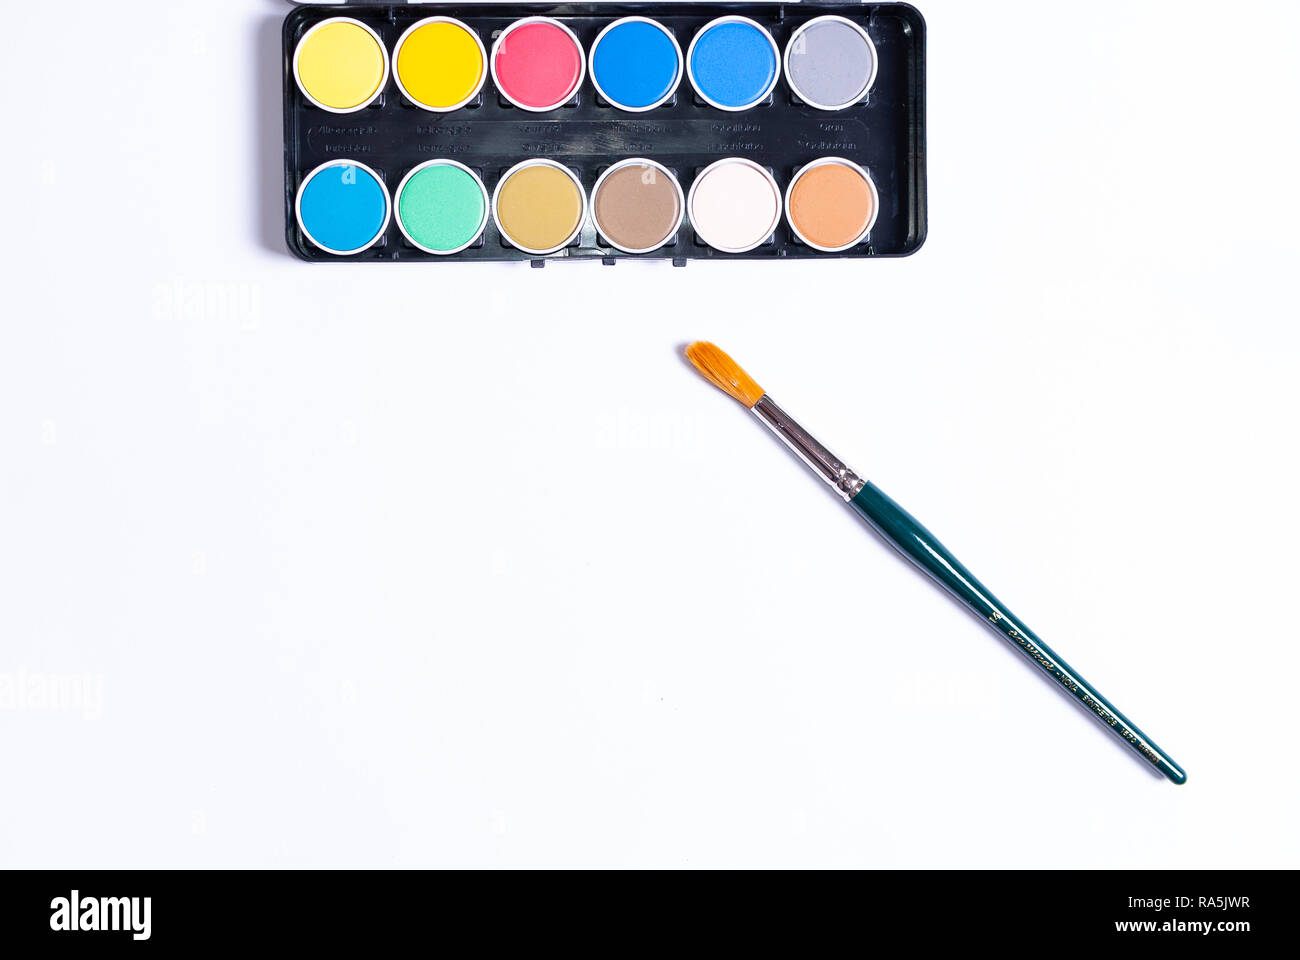 Flat lay of a colorful painting set and a paintbrush on white background with copy space Stock Photo